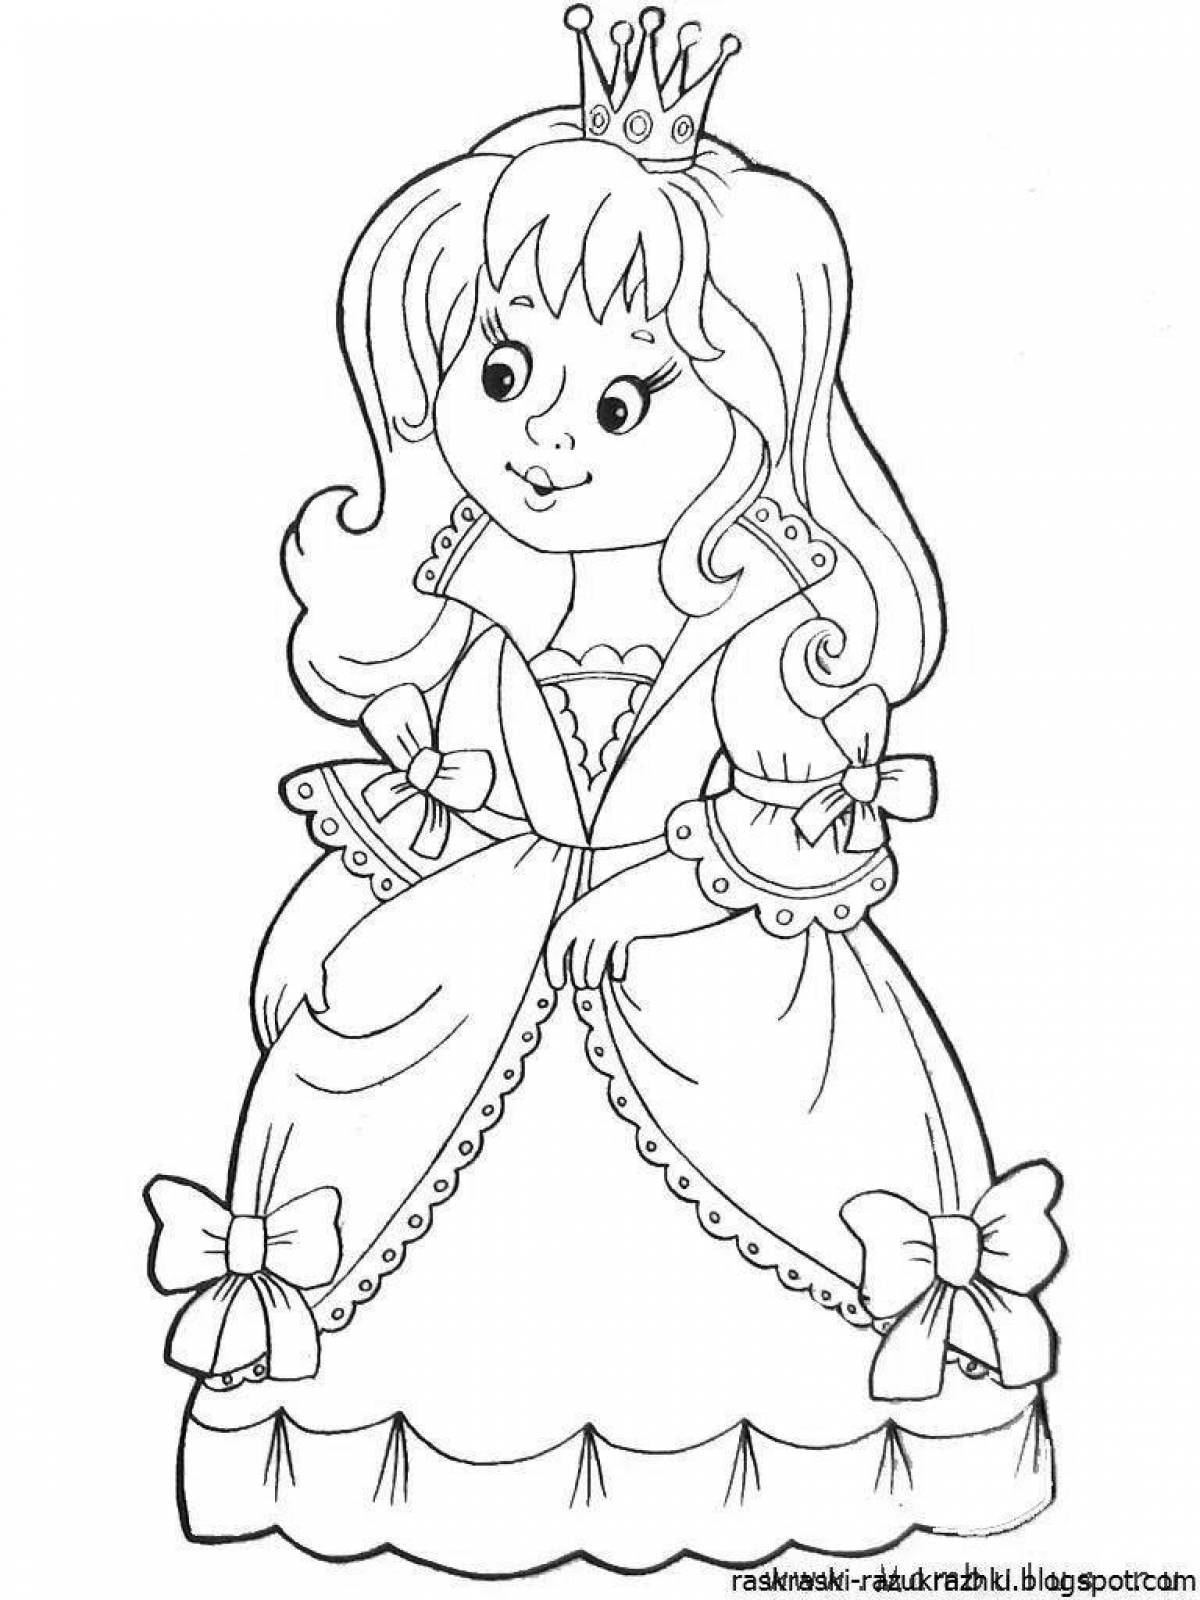 Fun coloring pages of fairy tale characters